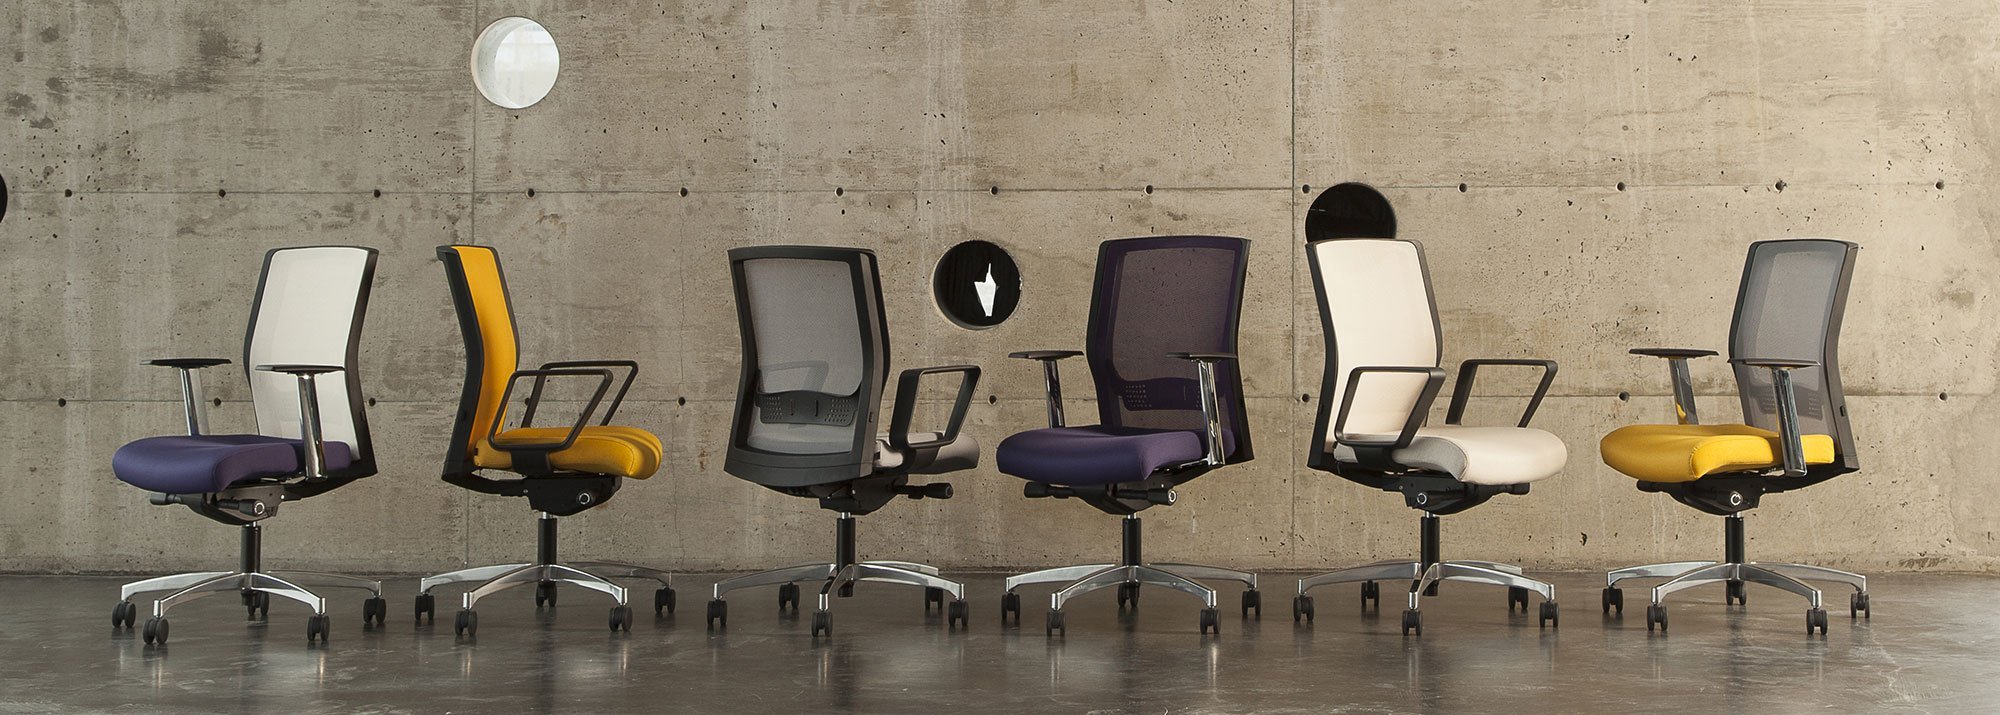 modern desk chairs lined up in an concrete industrial location